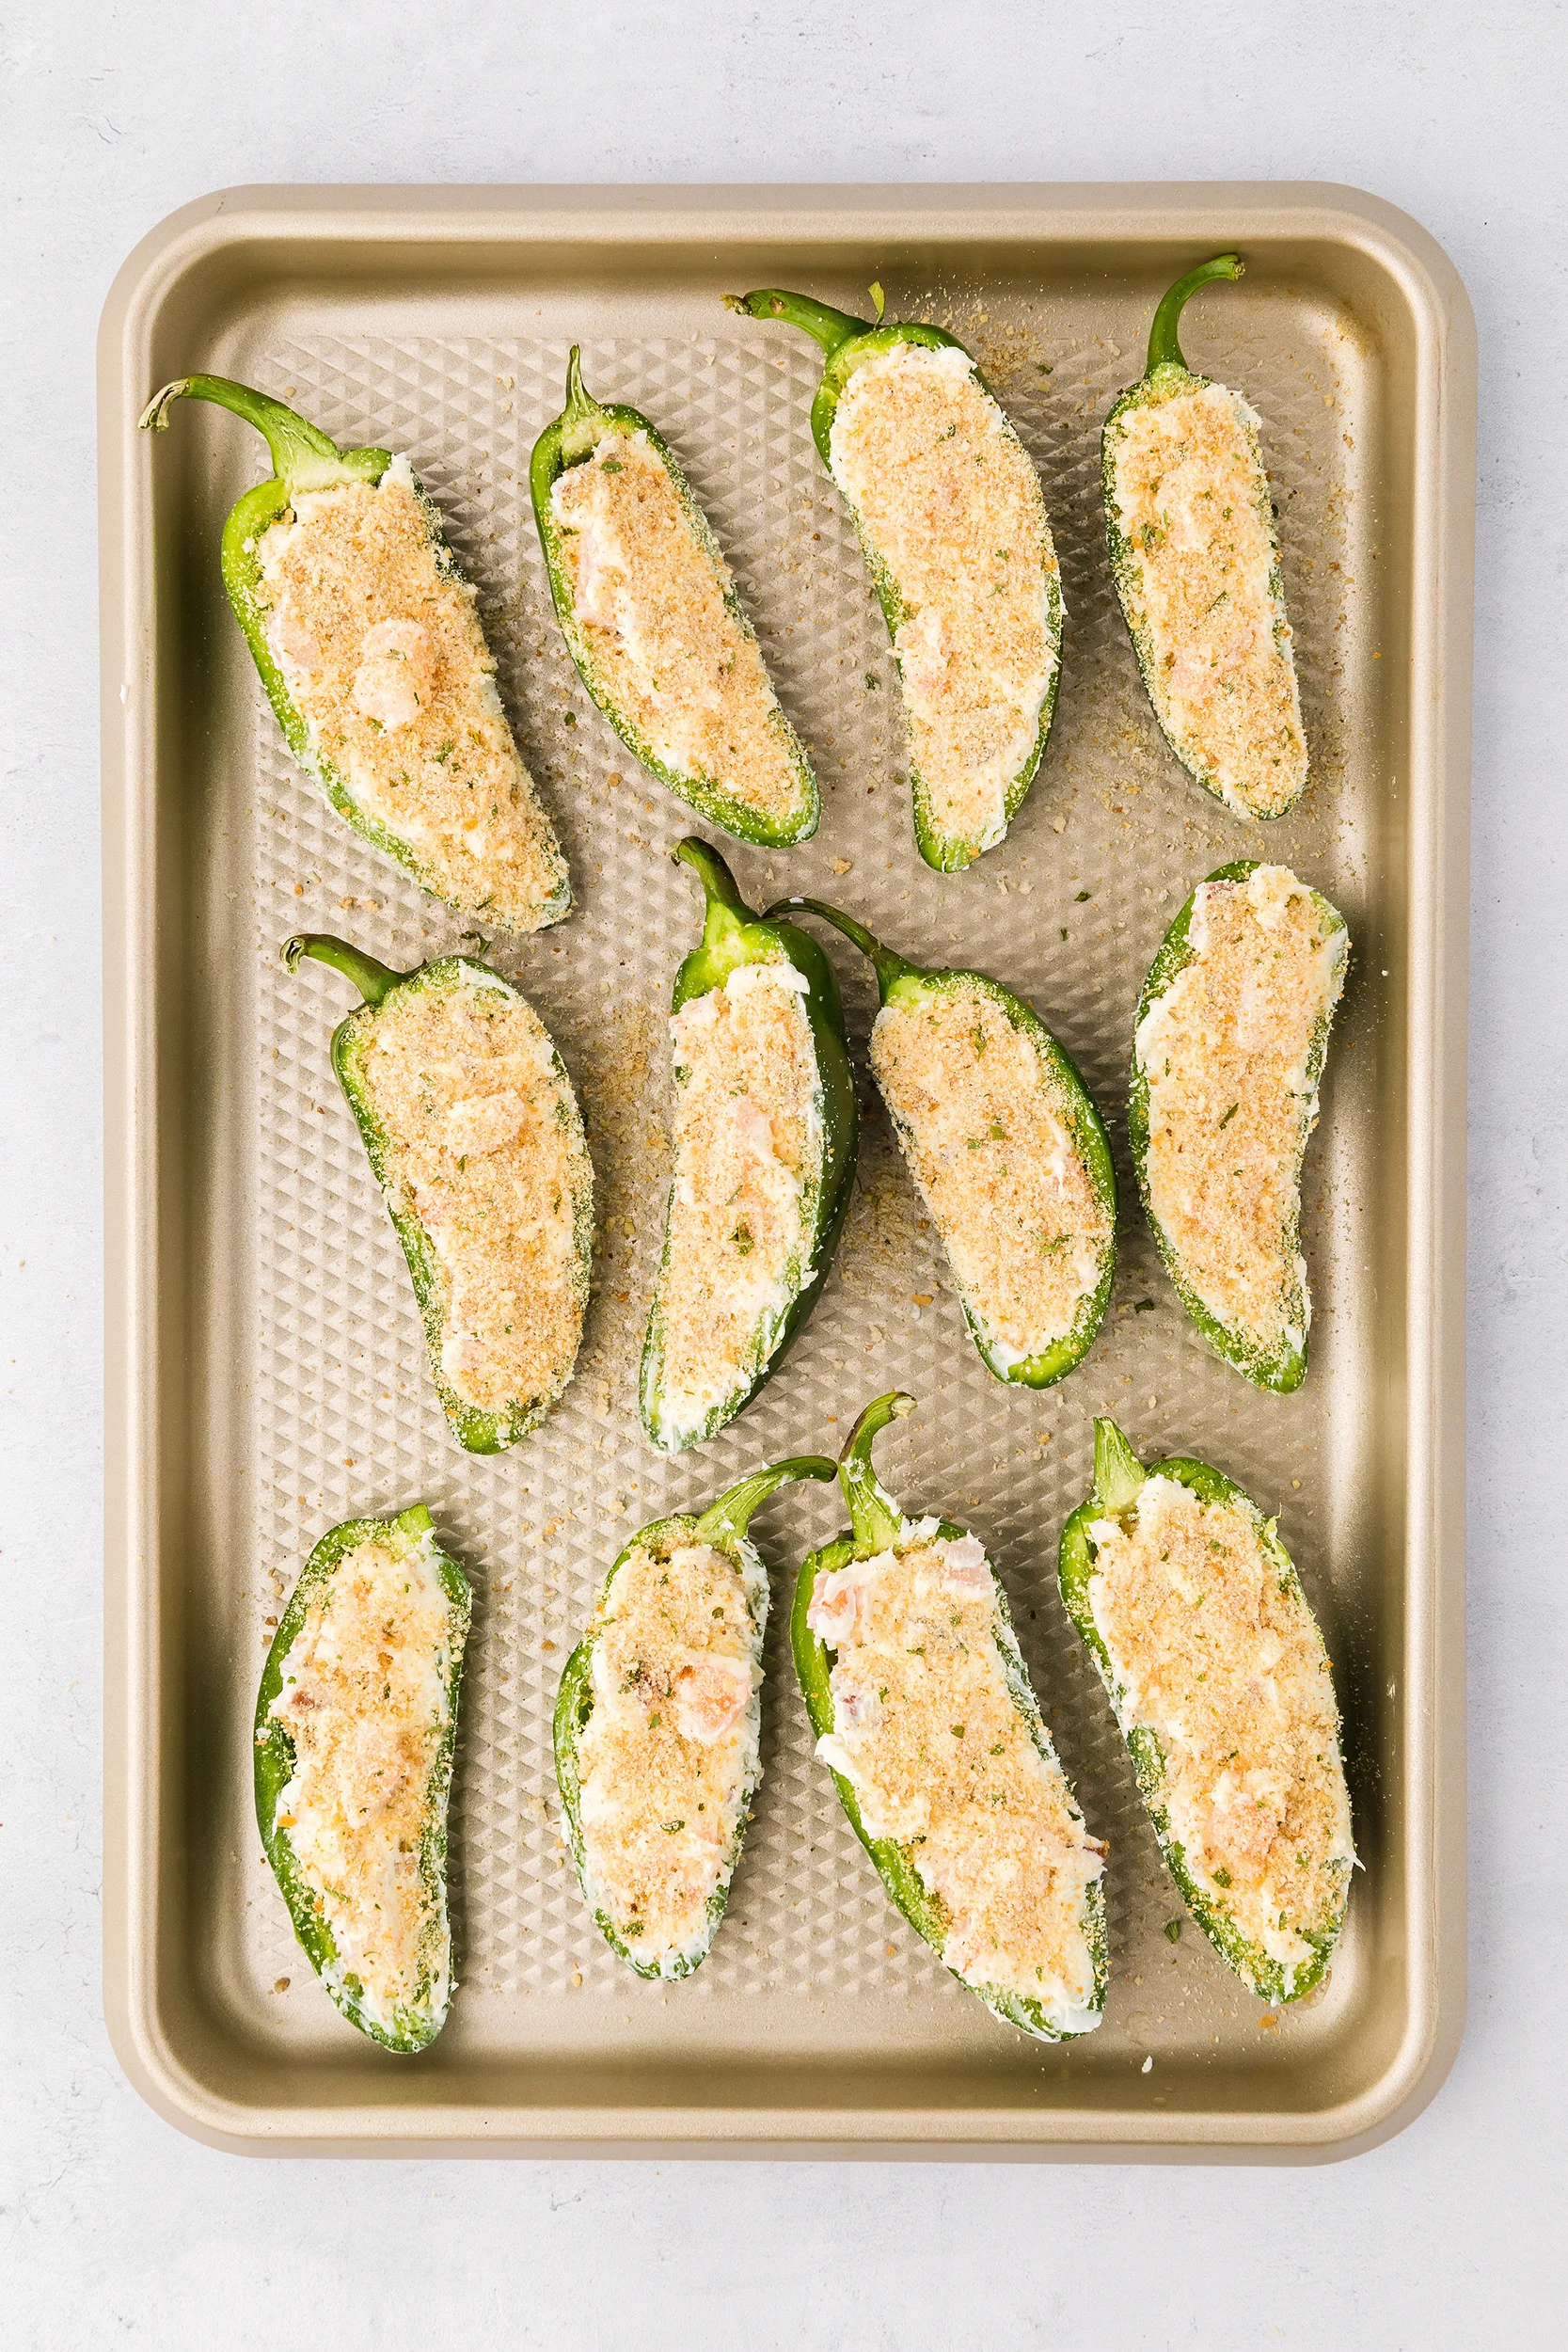 uncooked shrimp stuffed jalapeños topped with bread crumbs on a sheet pan